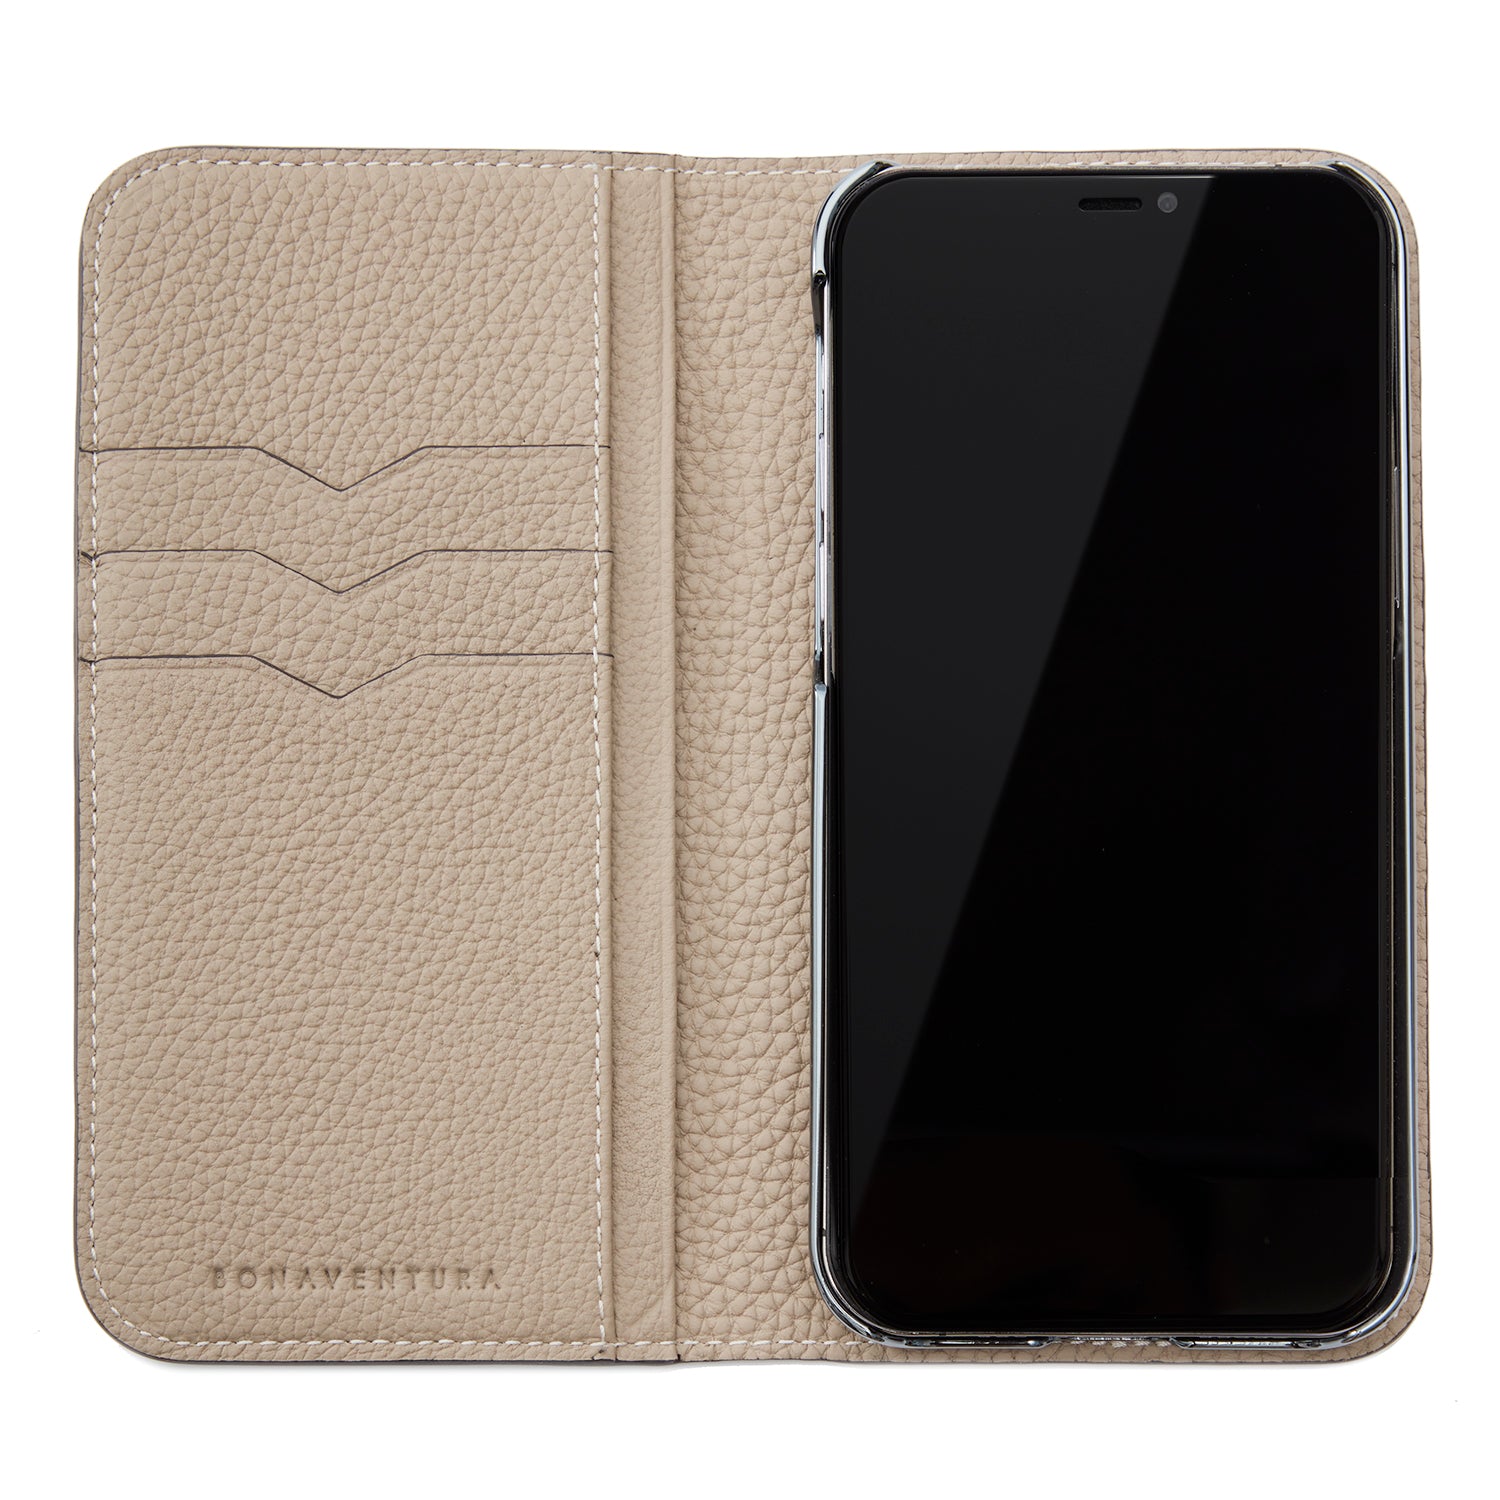 [Ginza store exclusive] (iPhone 12/12 Pro) Diary case embossed crocodile leather